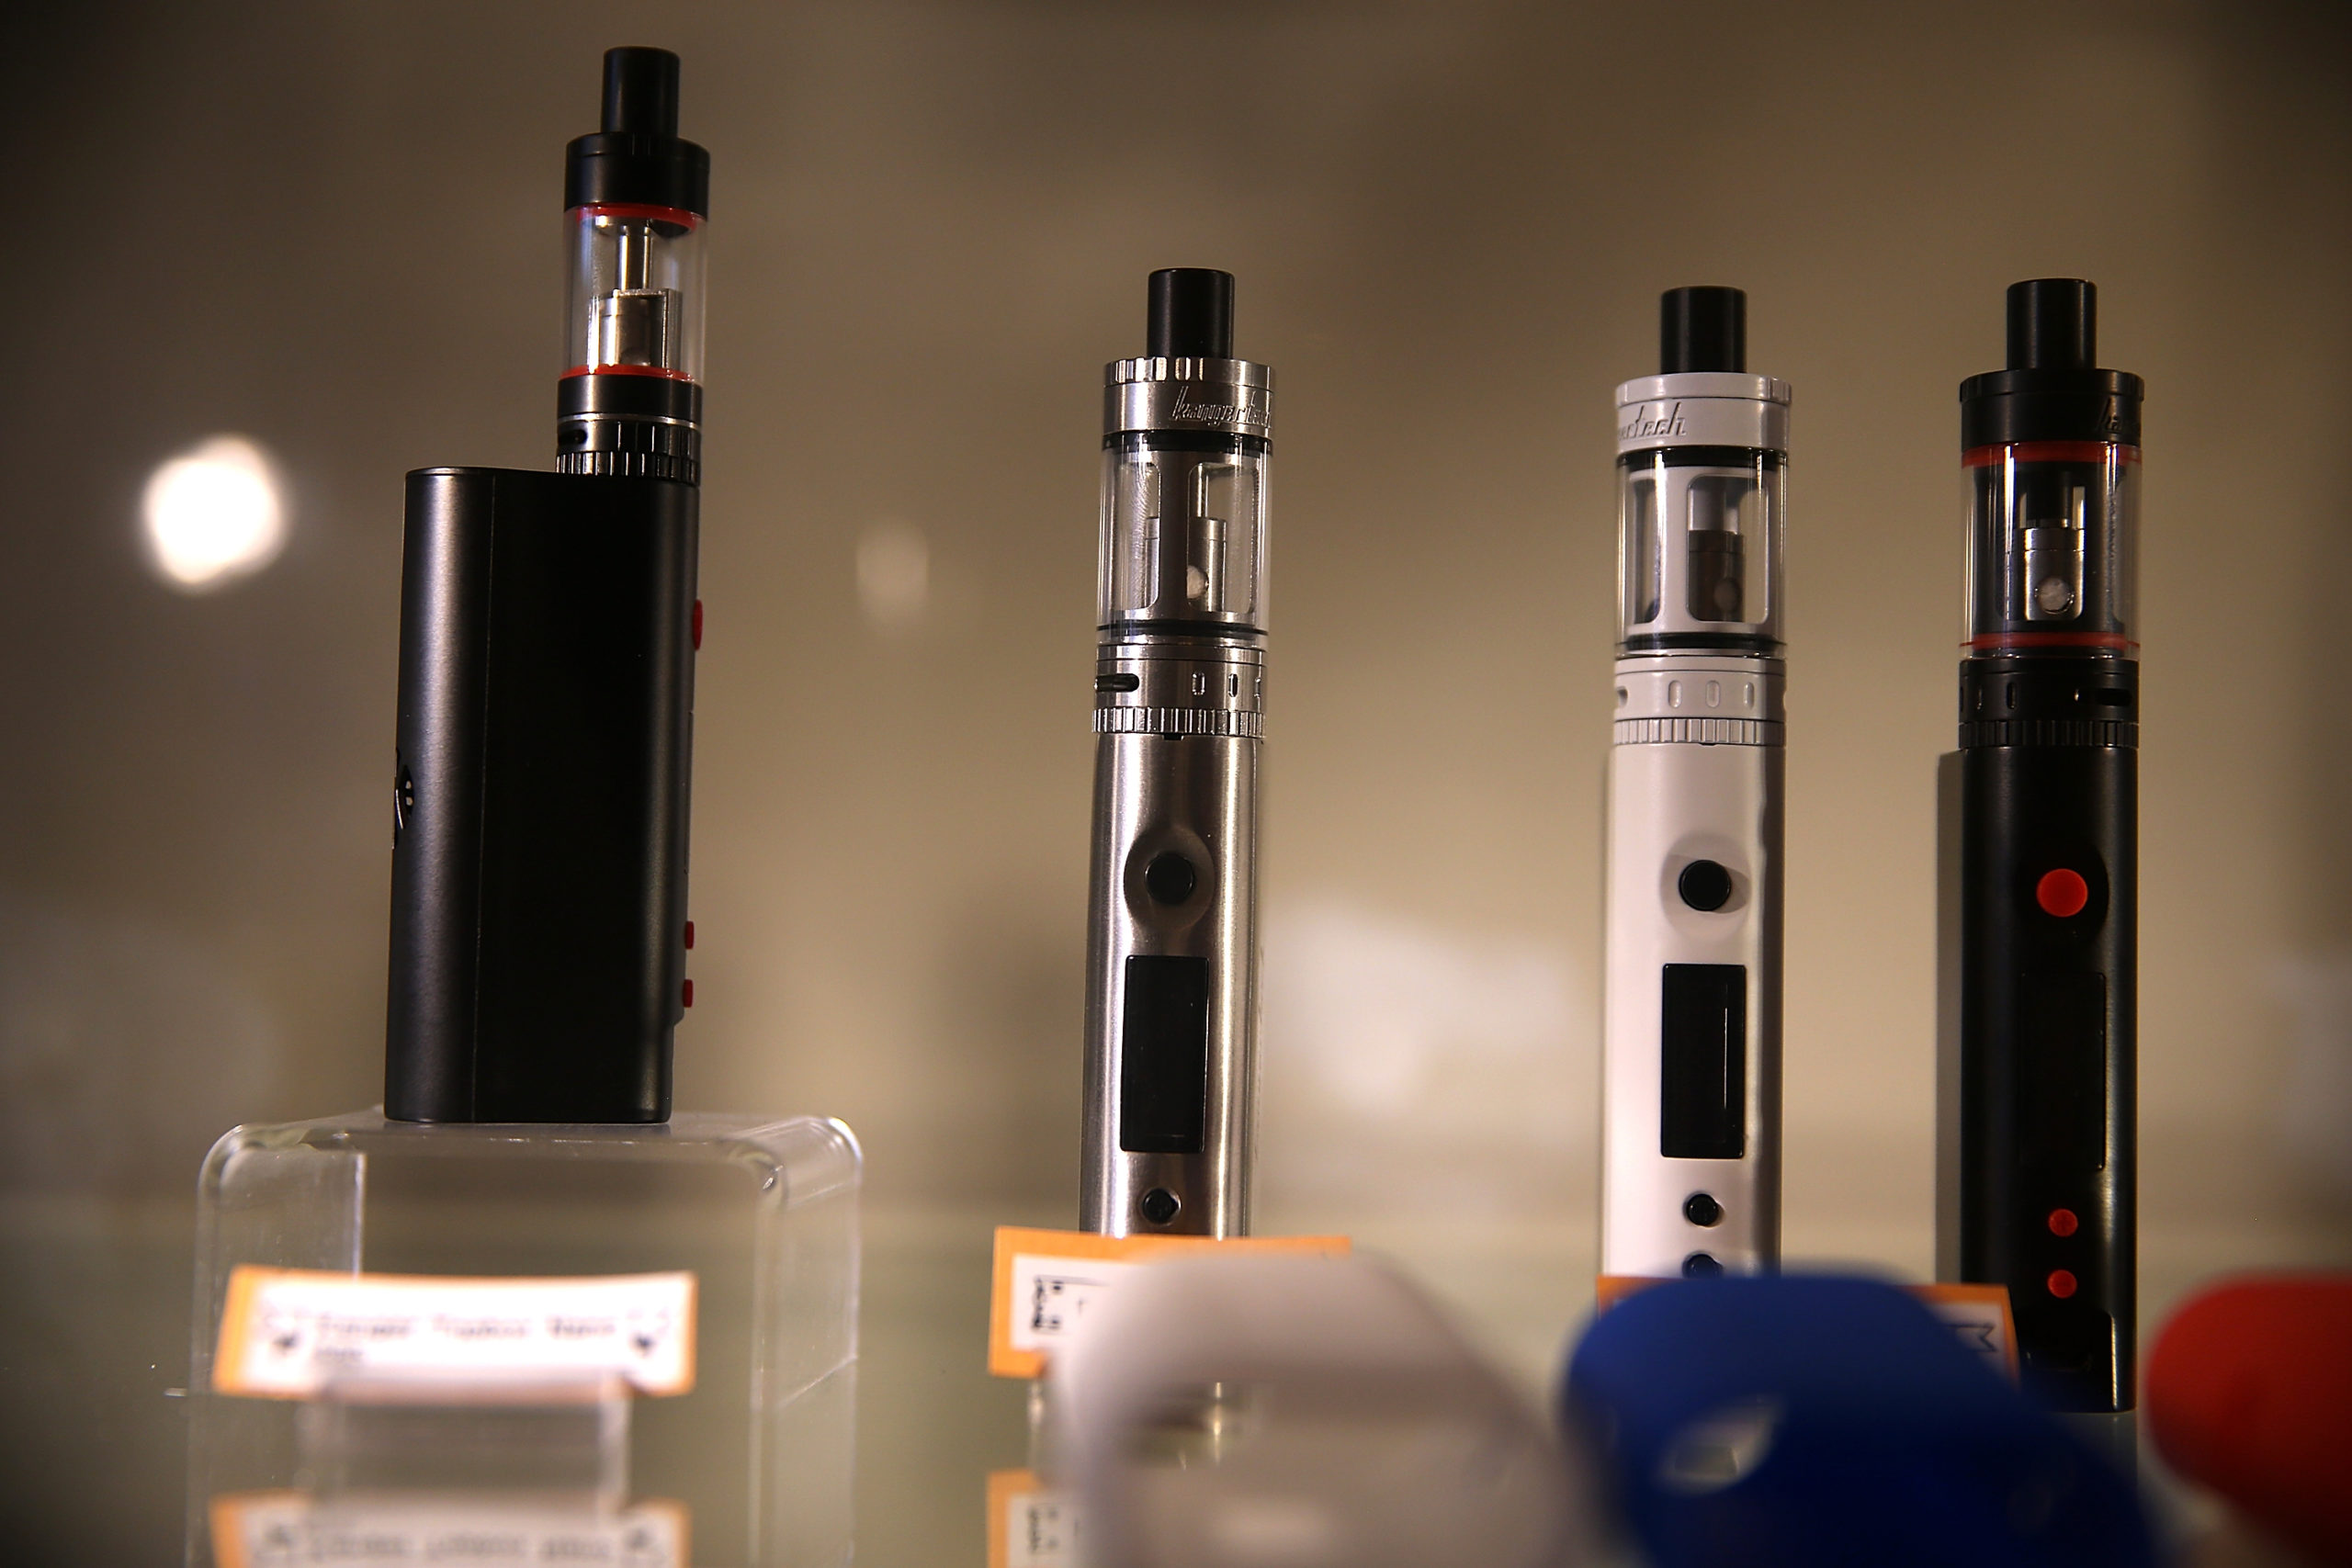 The Beginners Guide To Vaping: What Is It?